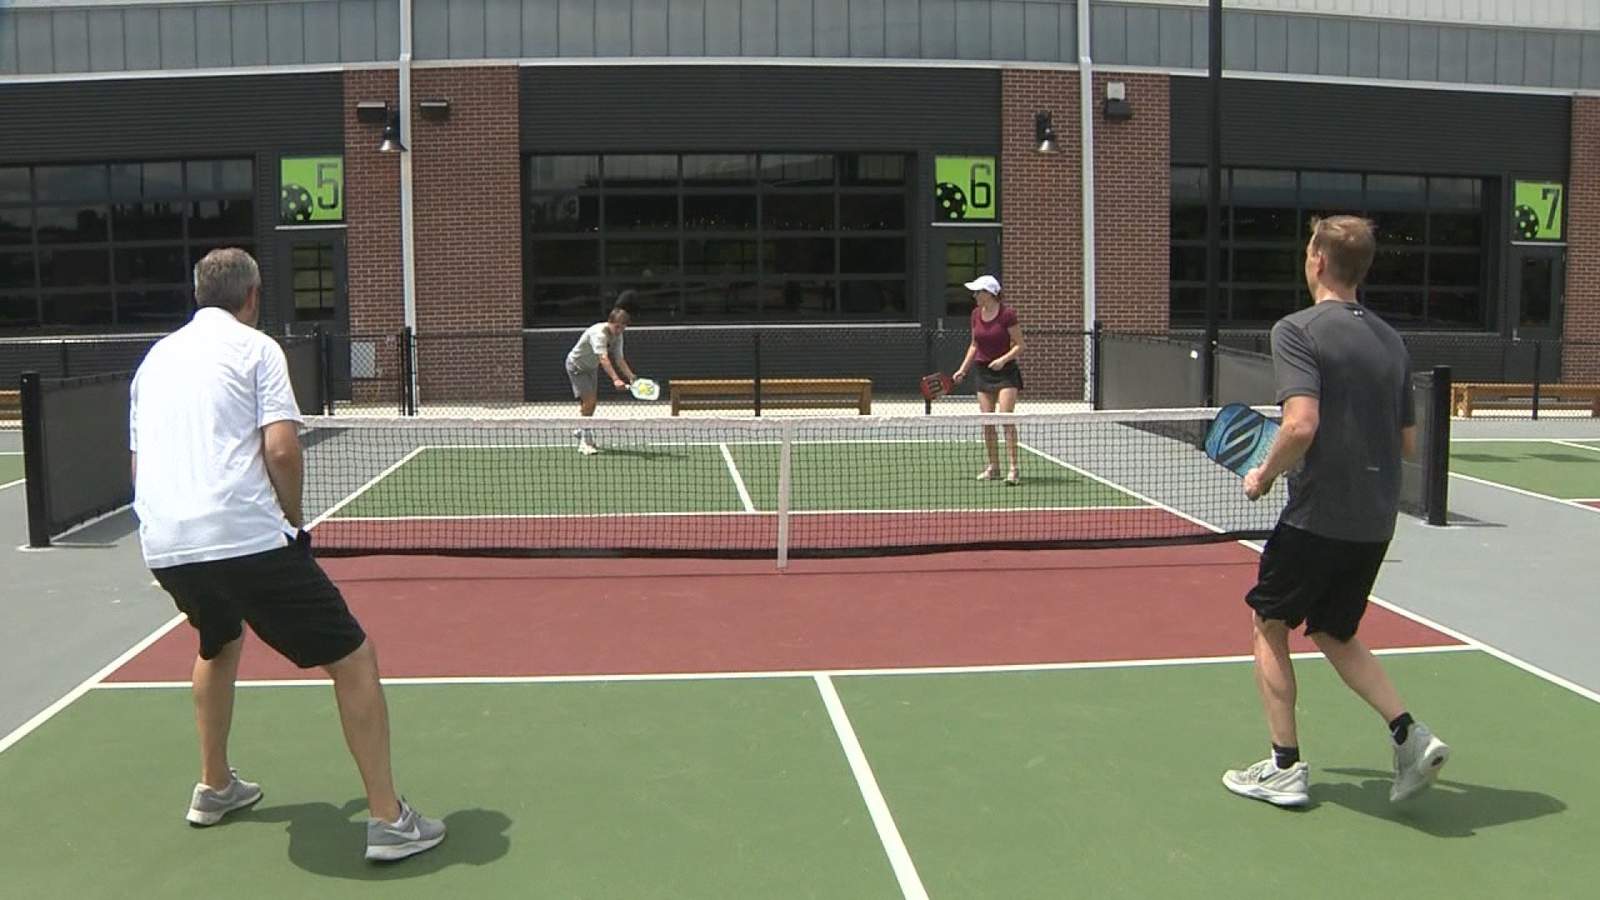 Chicken N Pickle-San Antonio demonstrates pickleball for Instant Replay Team